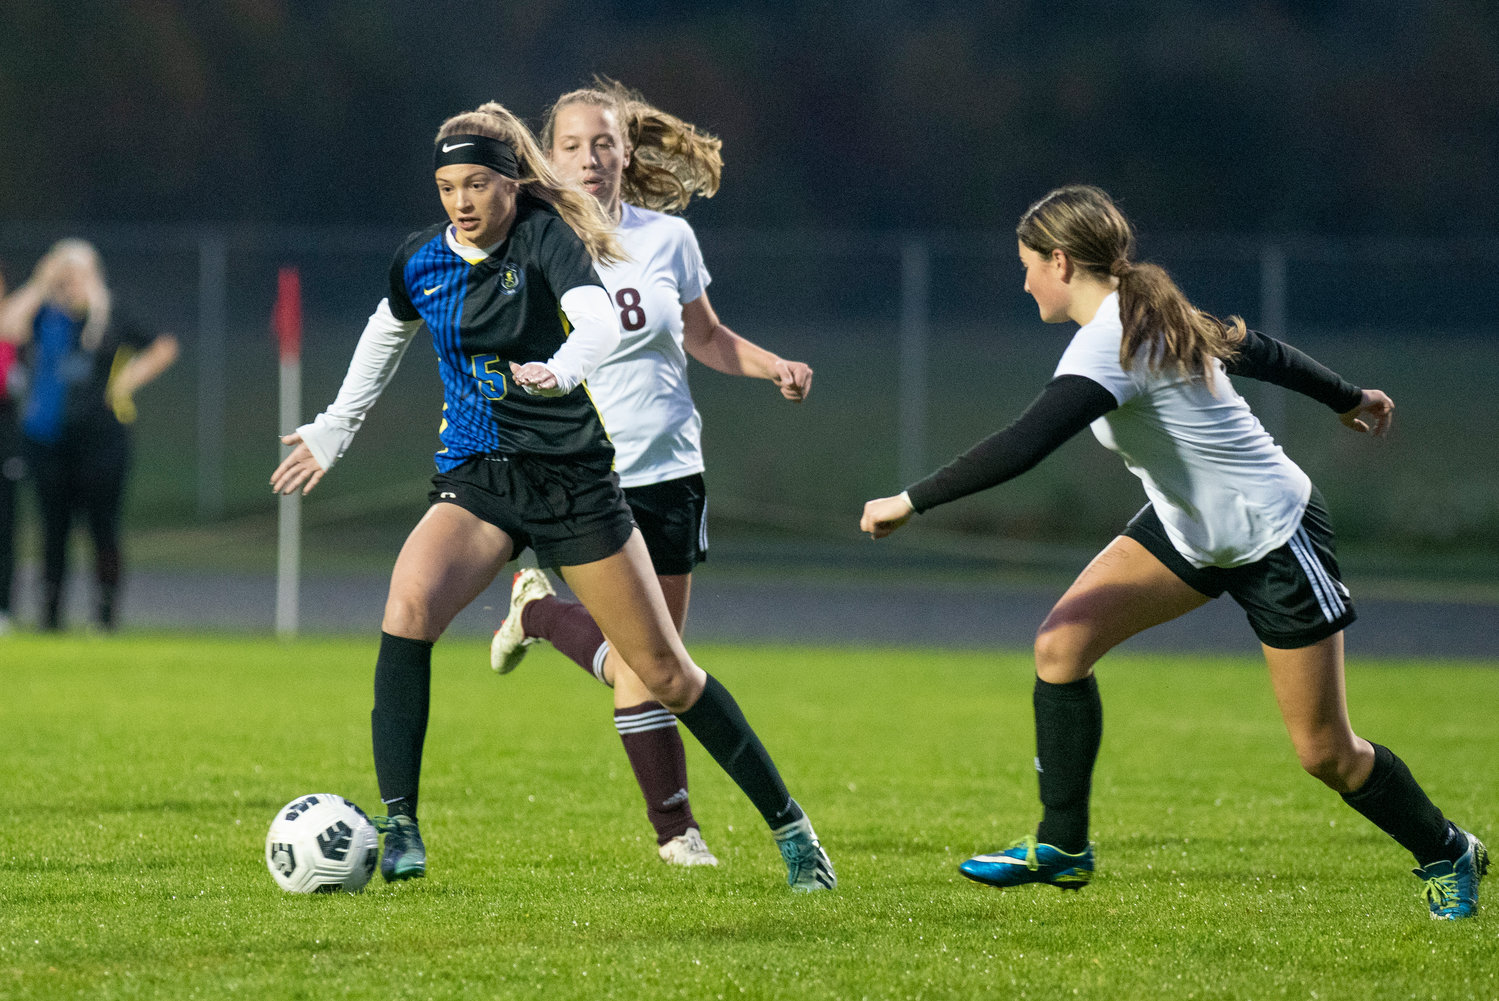 Adna's Kaylin Todd (5) gains possession against two Raymond-South Bend players on Oct. 13, 2021.